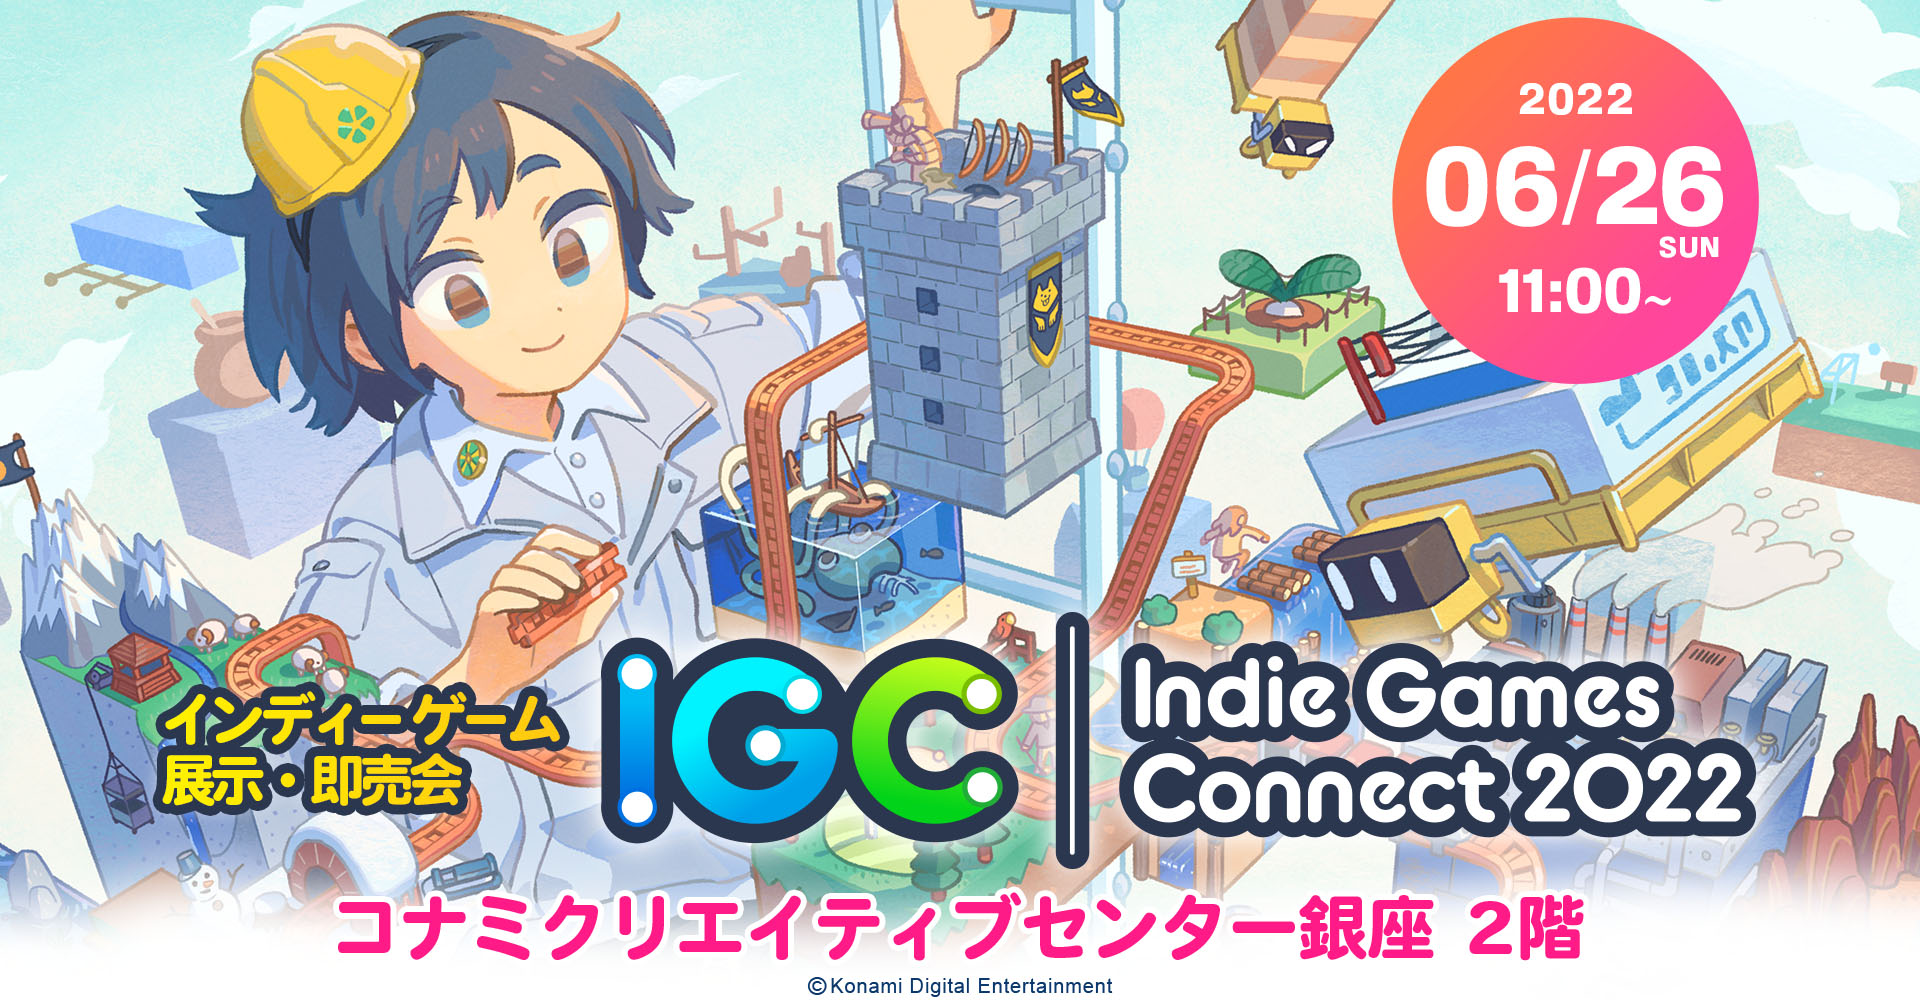 #
      Konami to hold Indie Games Connect 2022 on June 26